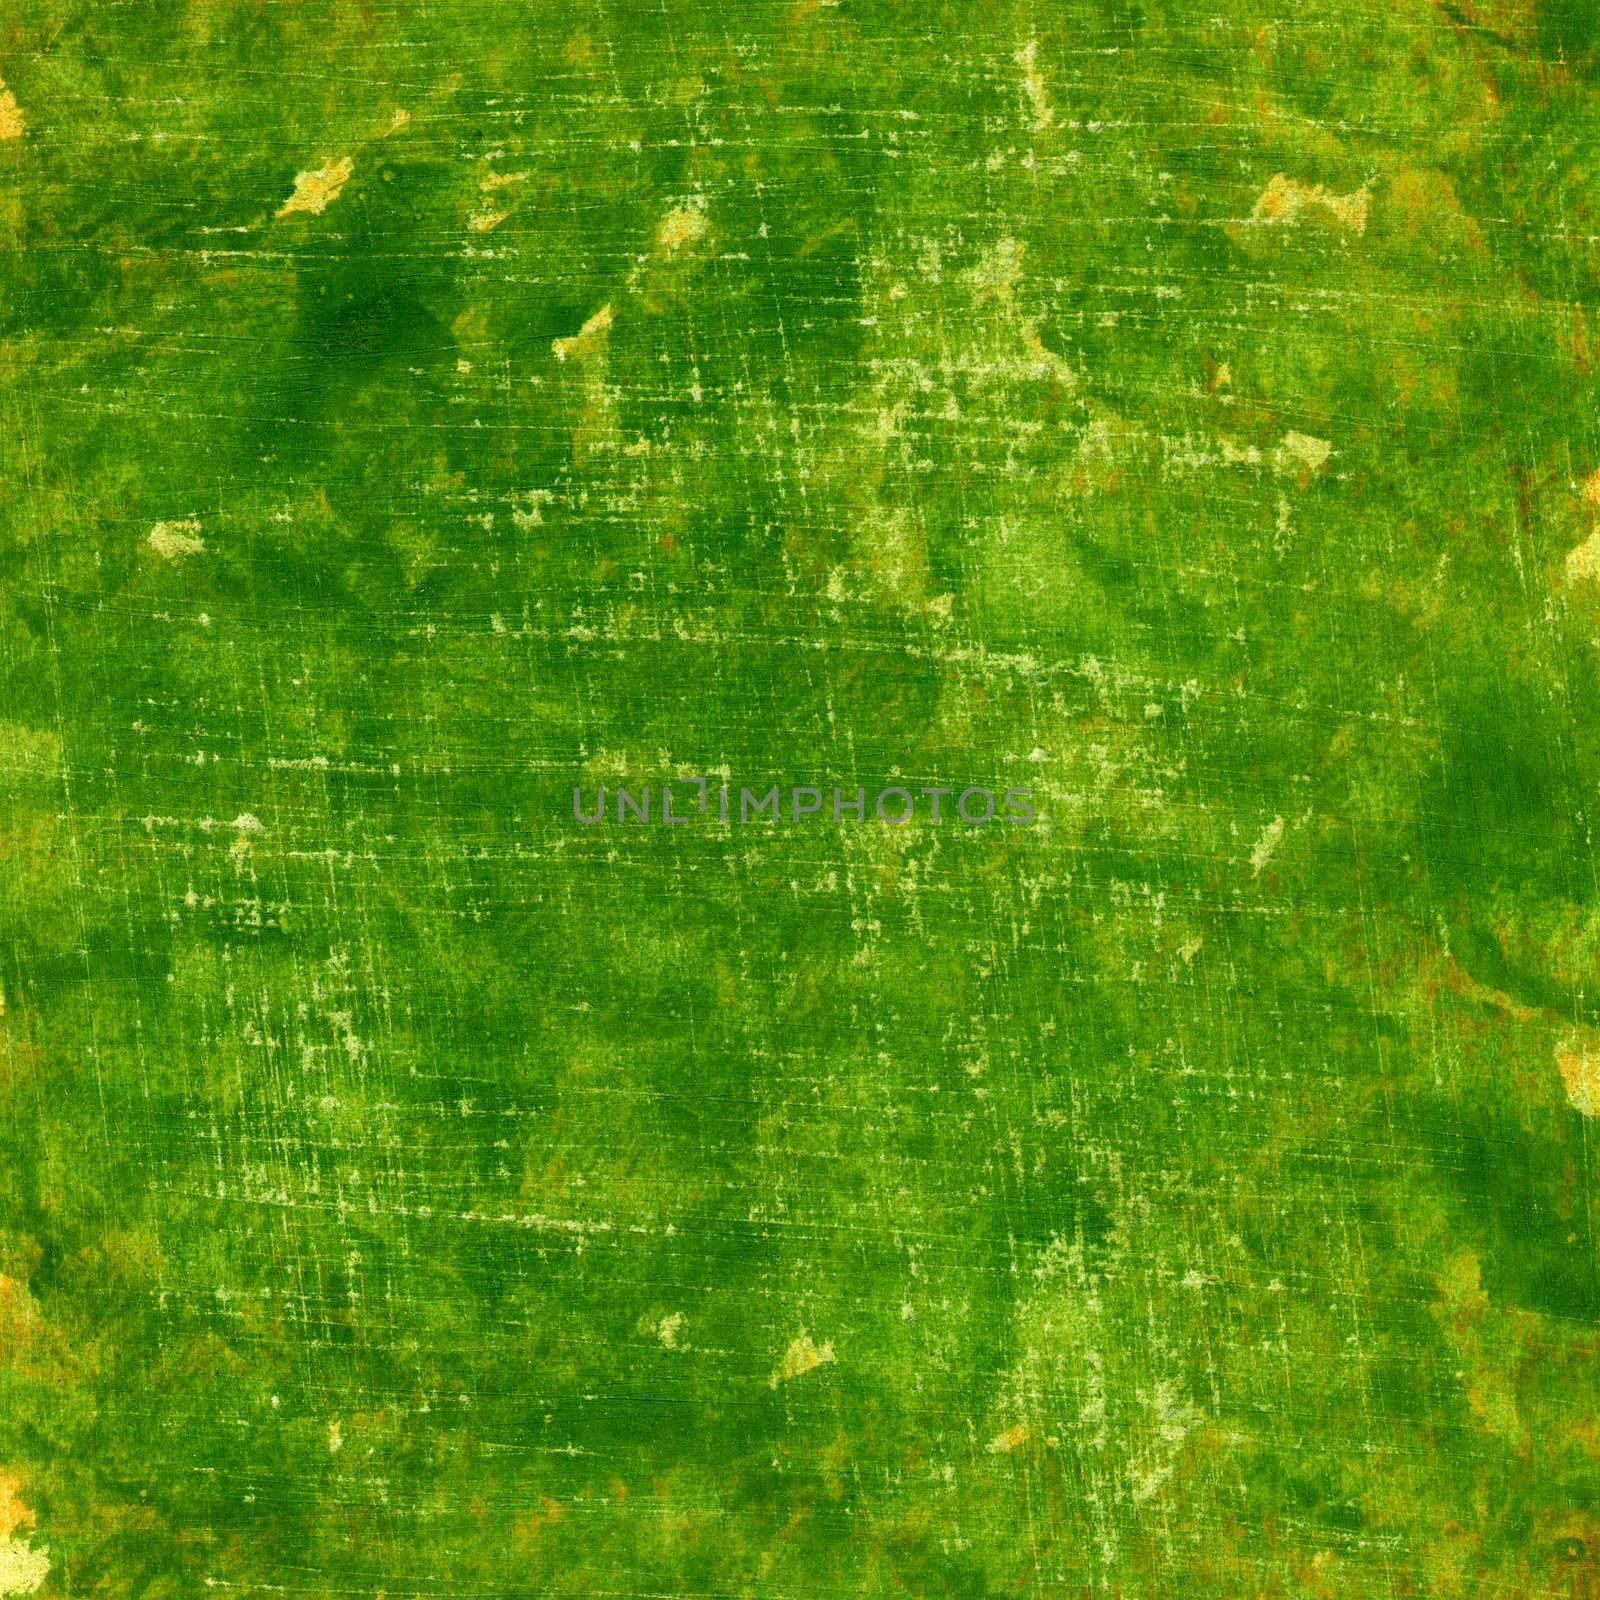 green grunge painted watercolor paper texture by PixelsAway